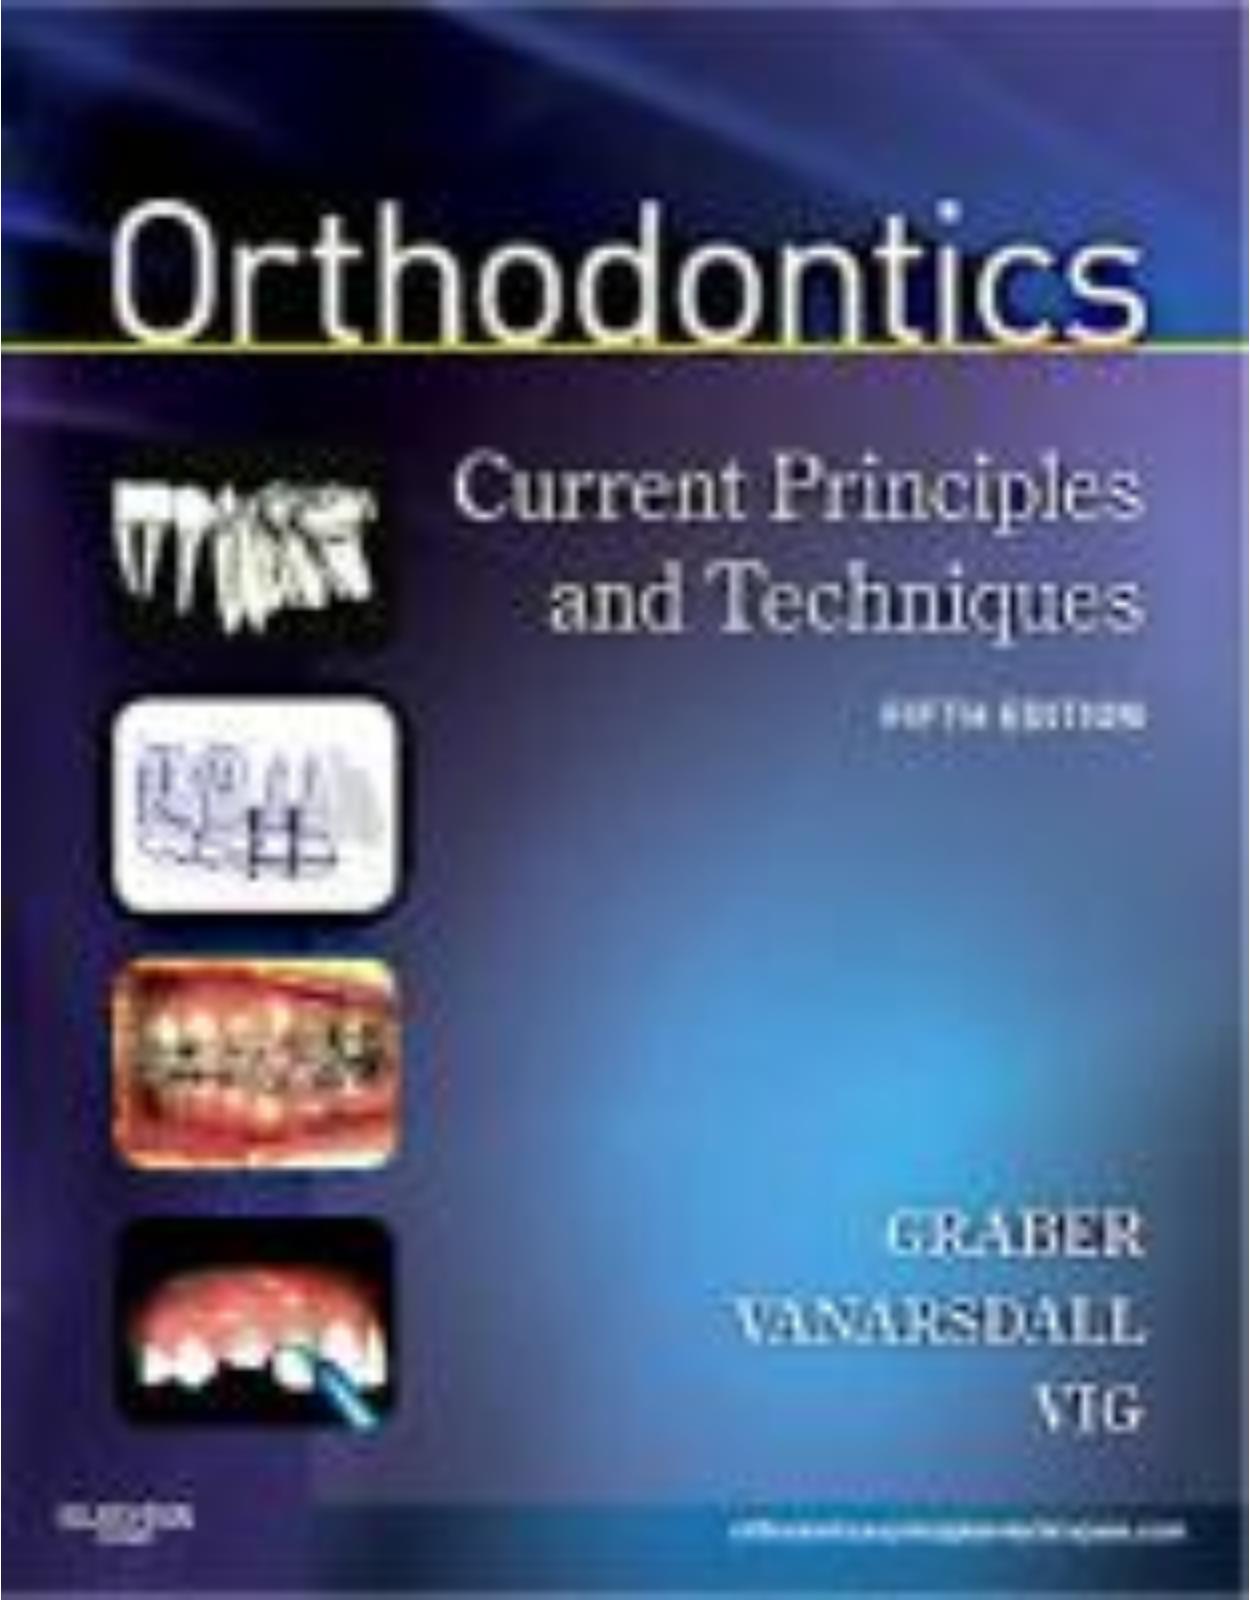 Orthodontics, 5th Edition Current Principles and Techniques